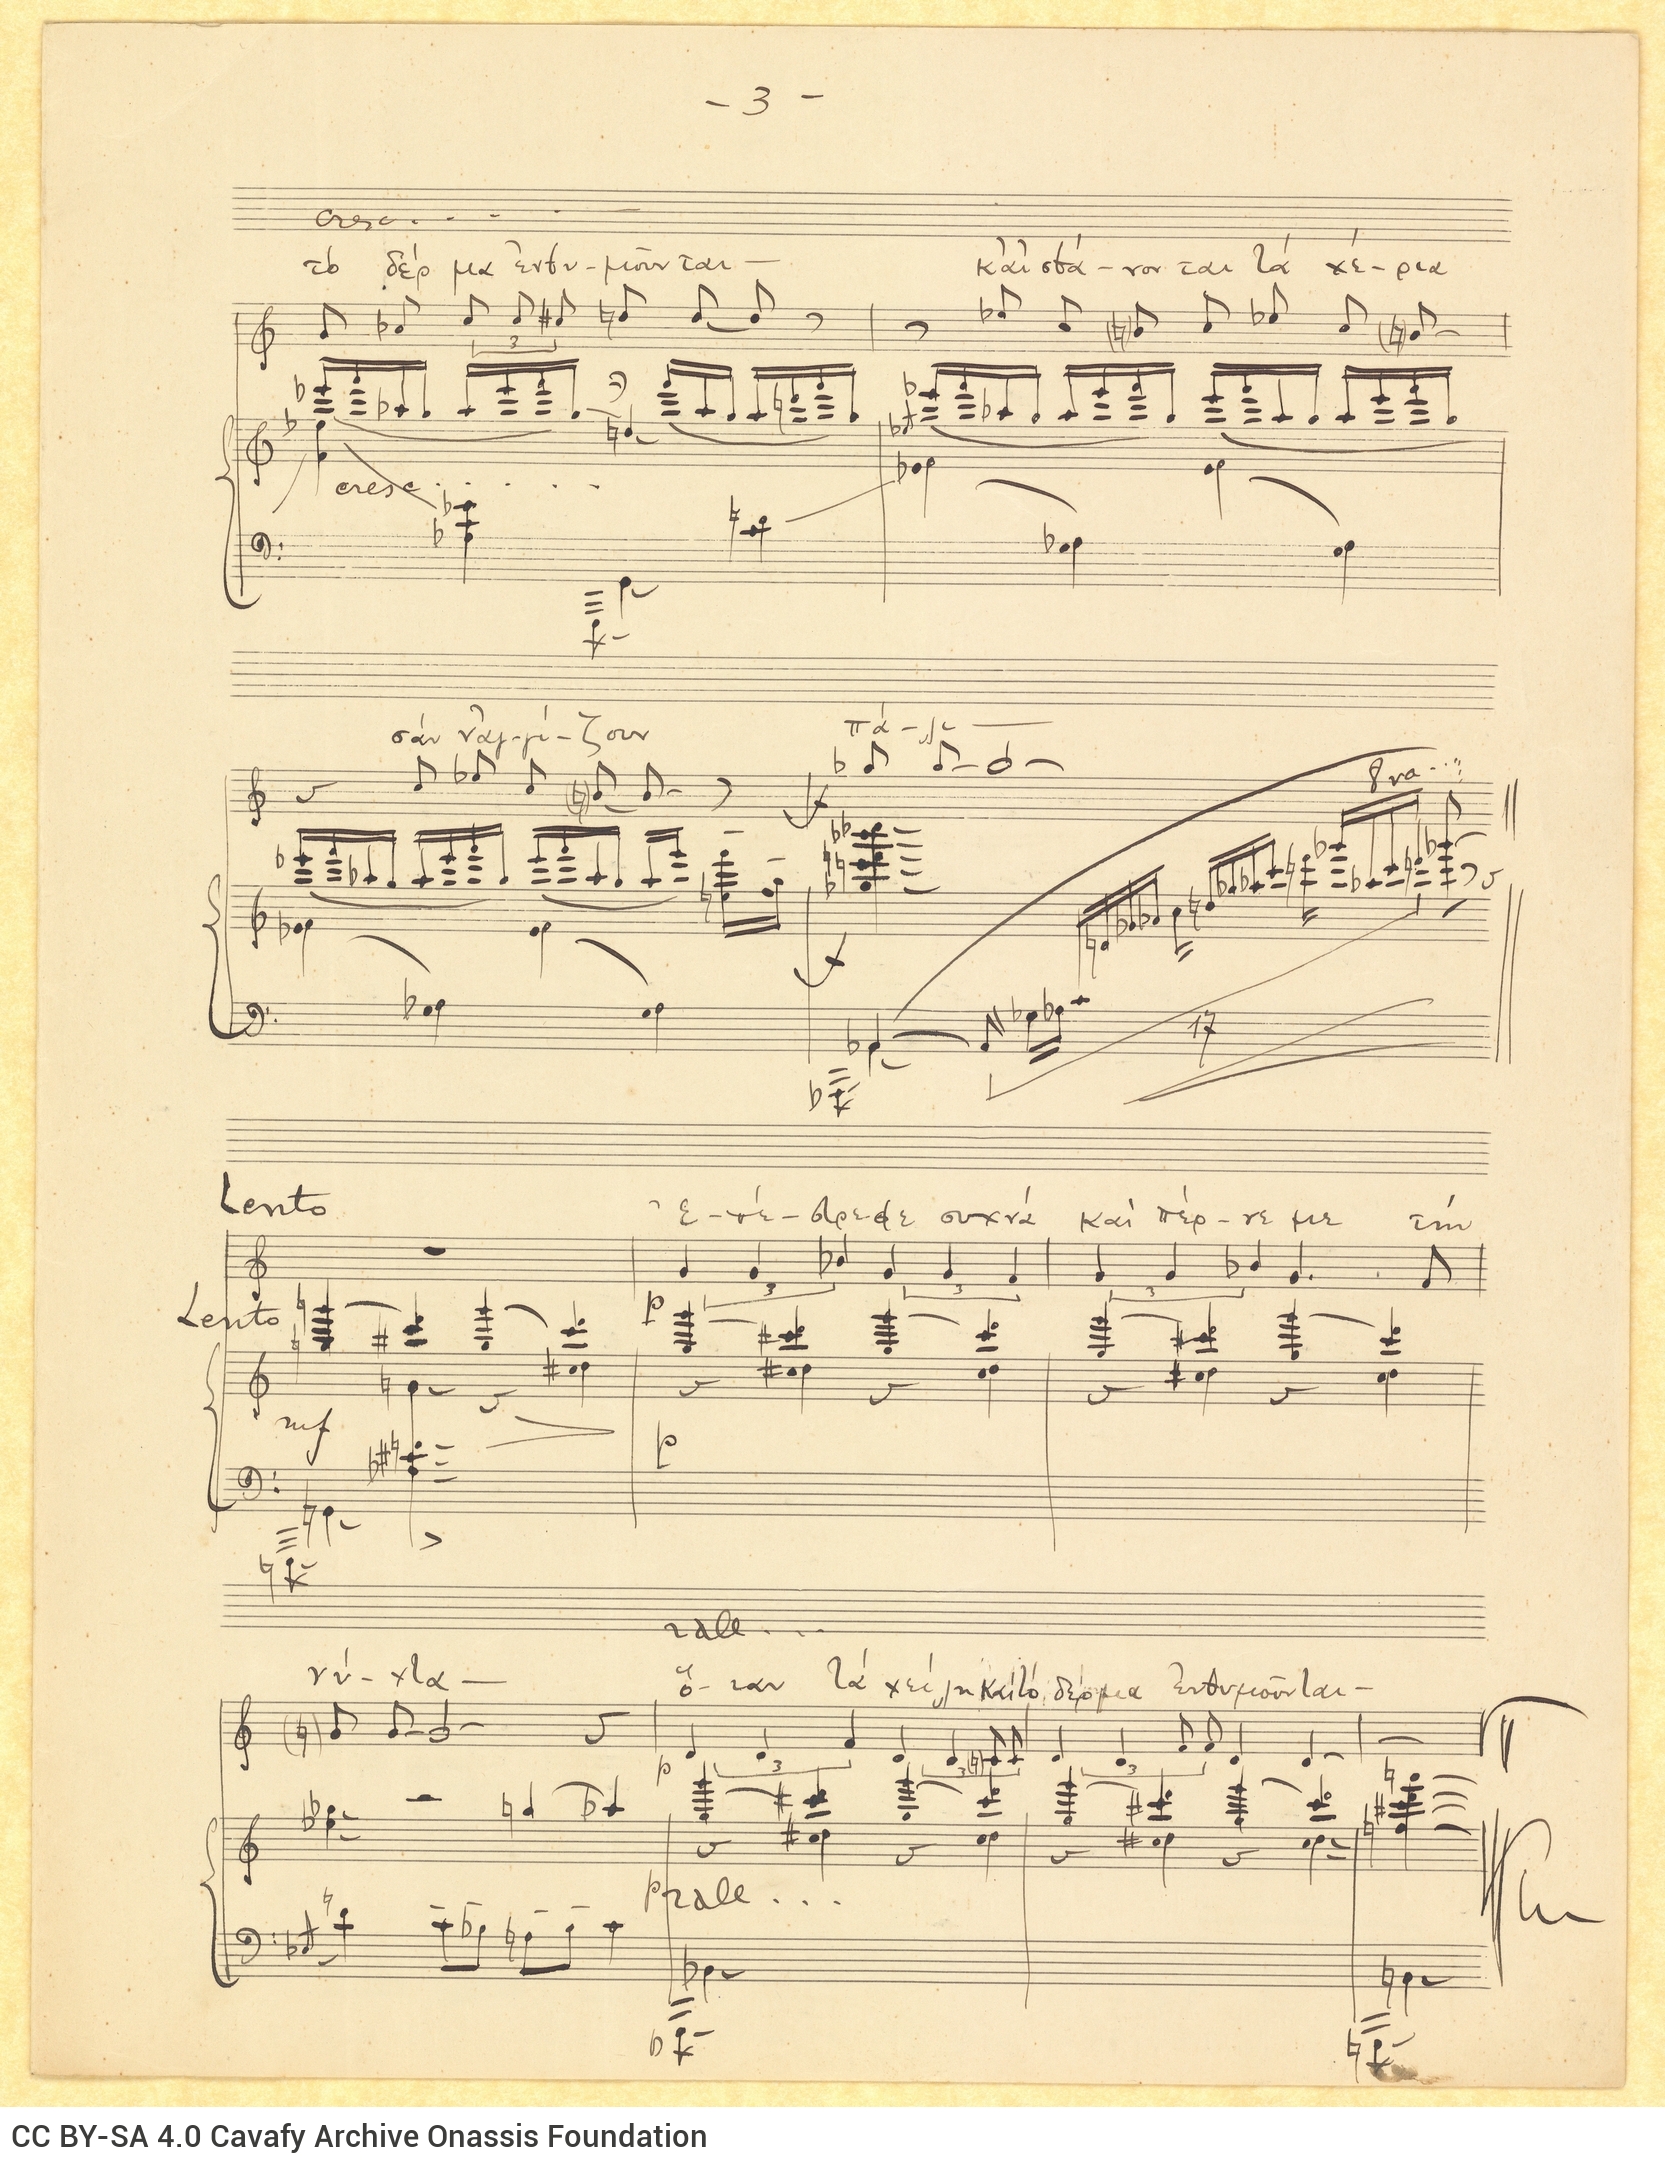 Handwritten musical score on the three pages of a double sheet notepaper. Composition for voice and piano, based on the po